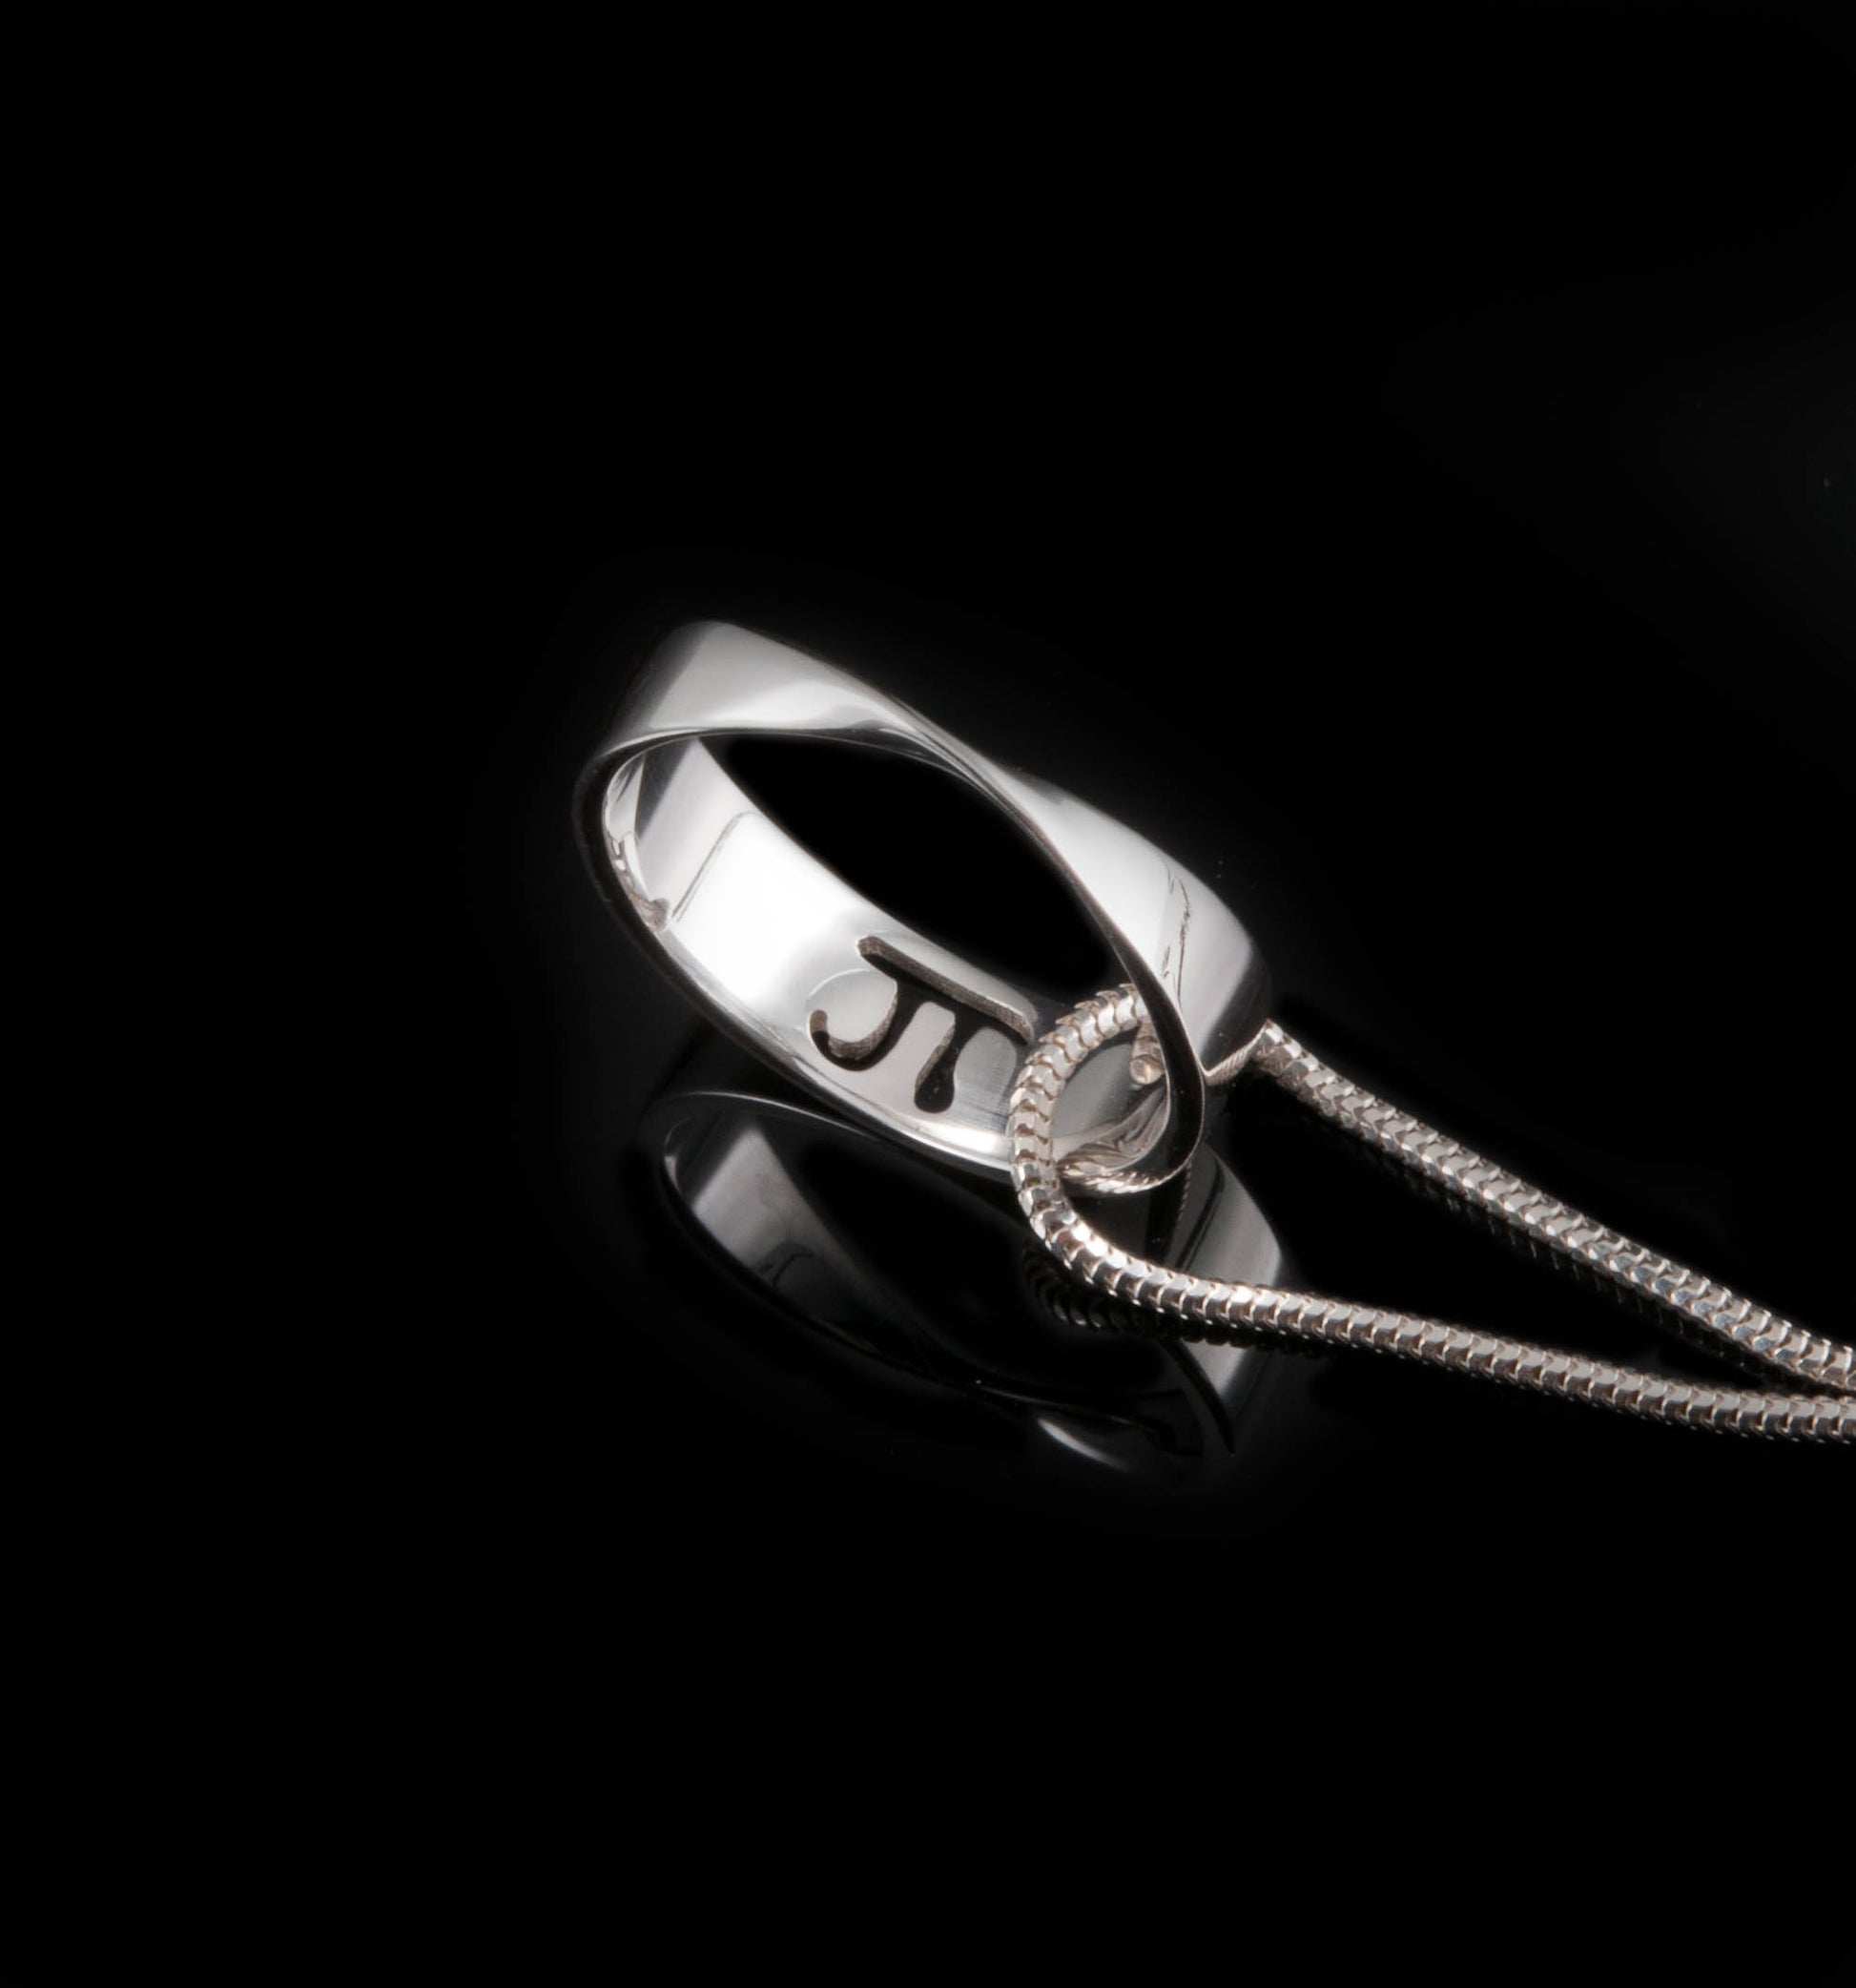 Mobius ring with the Pie symbol cut through the band in the centre point.